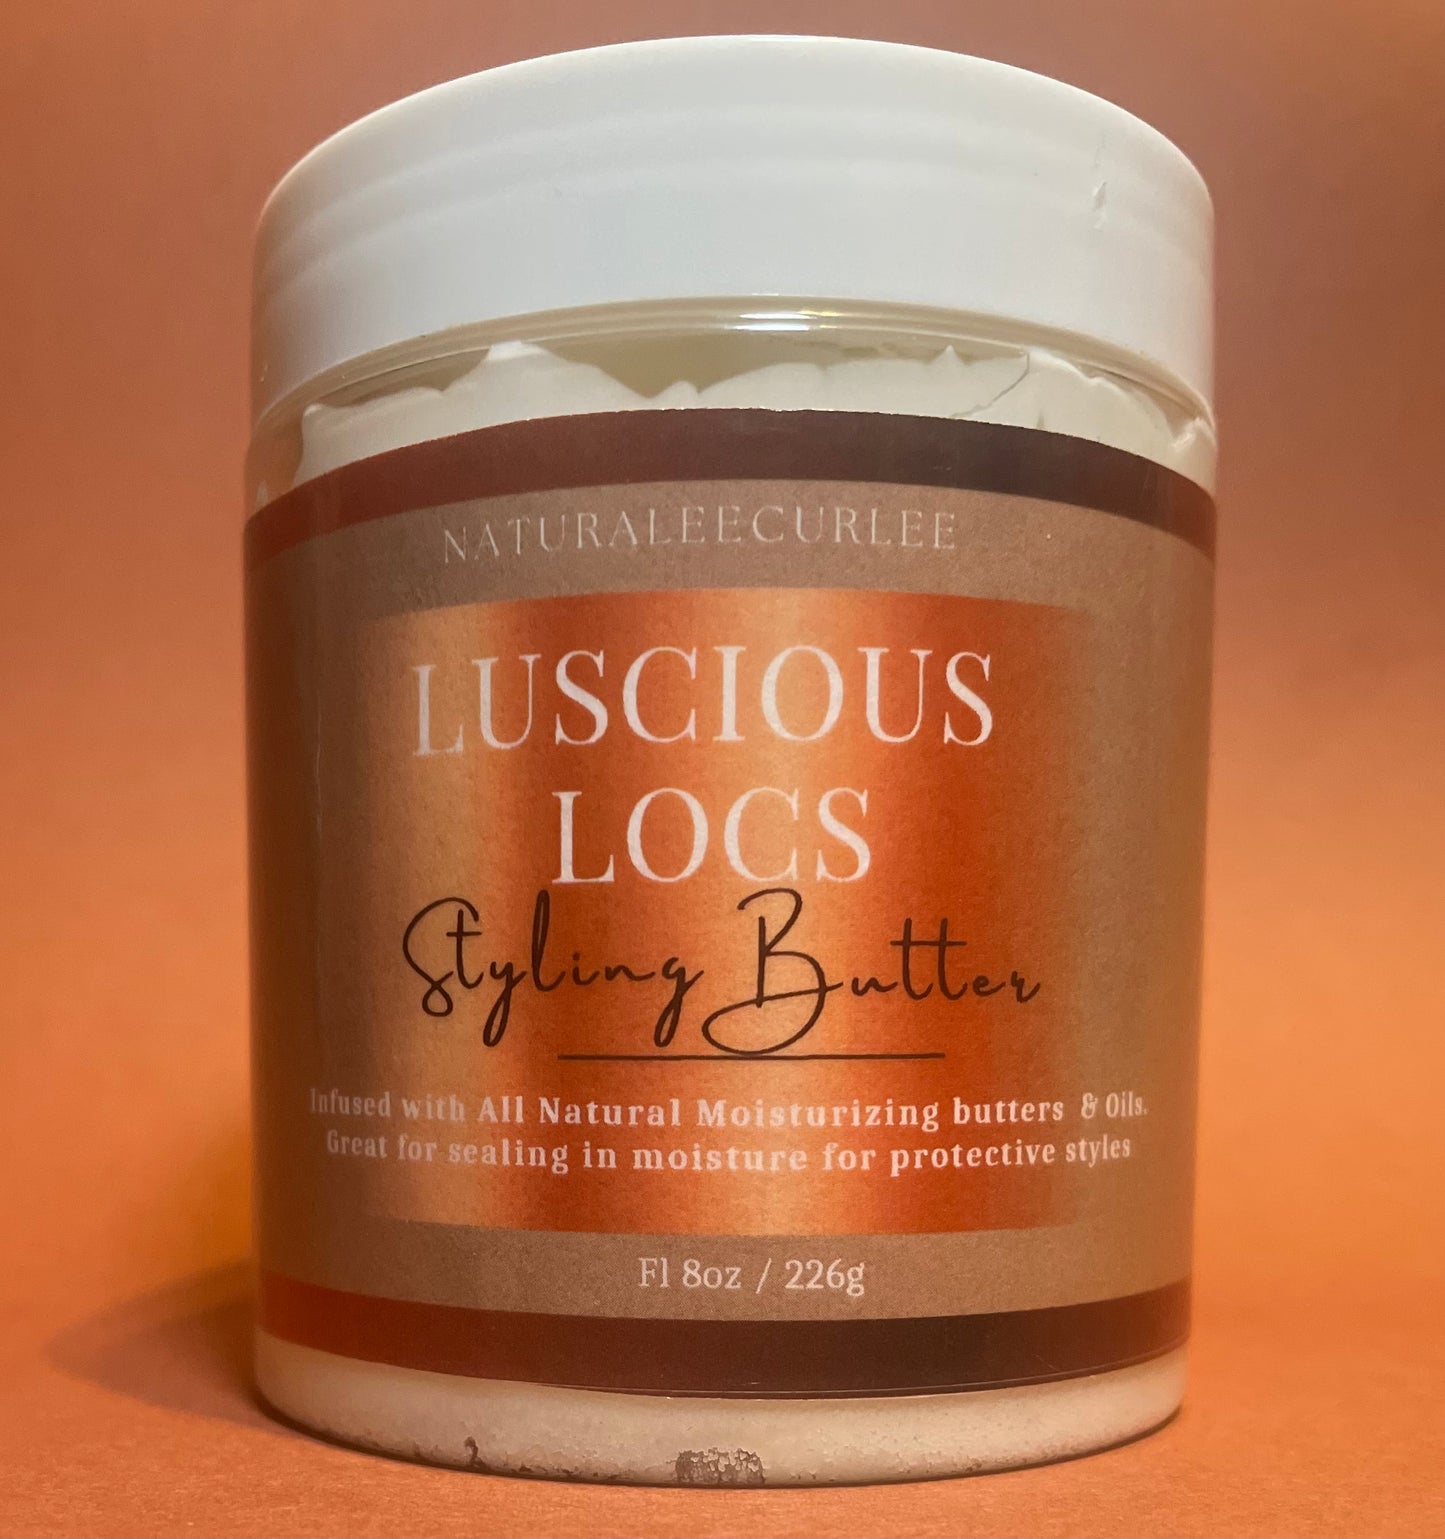 Luscious Locs Styling Butter